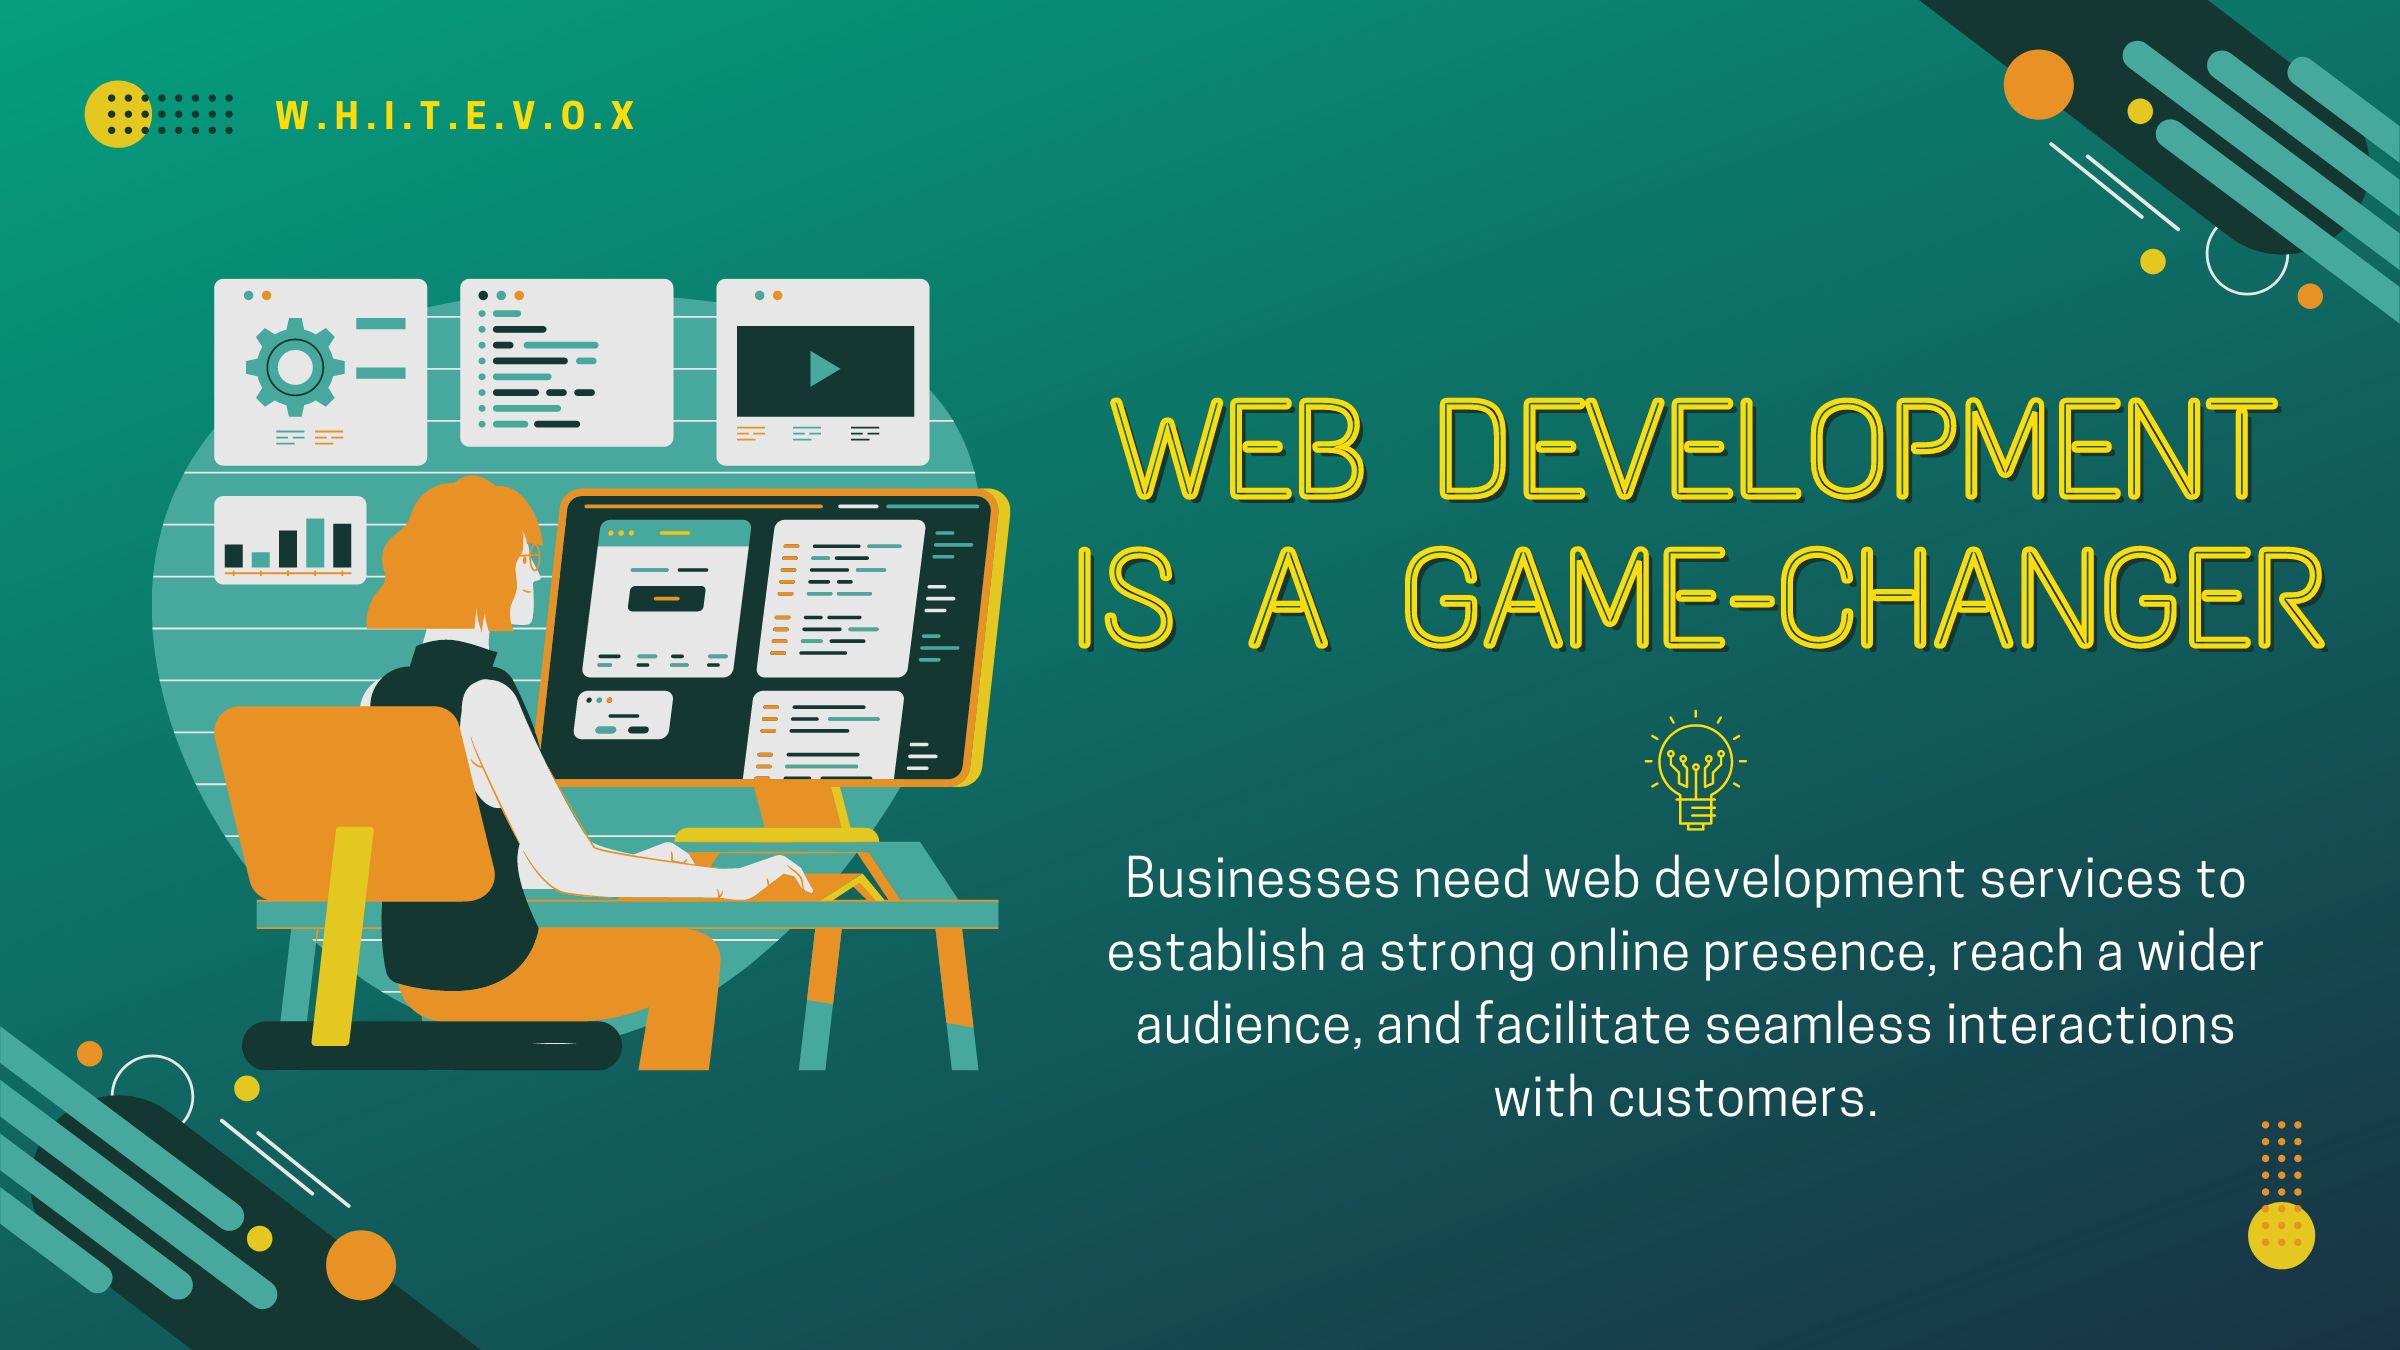 How web development is a game-changer for growing businesses